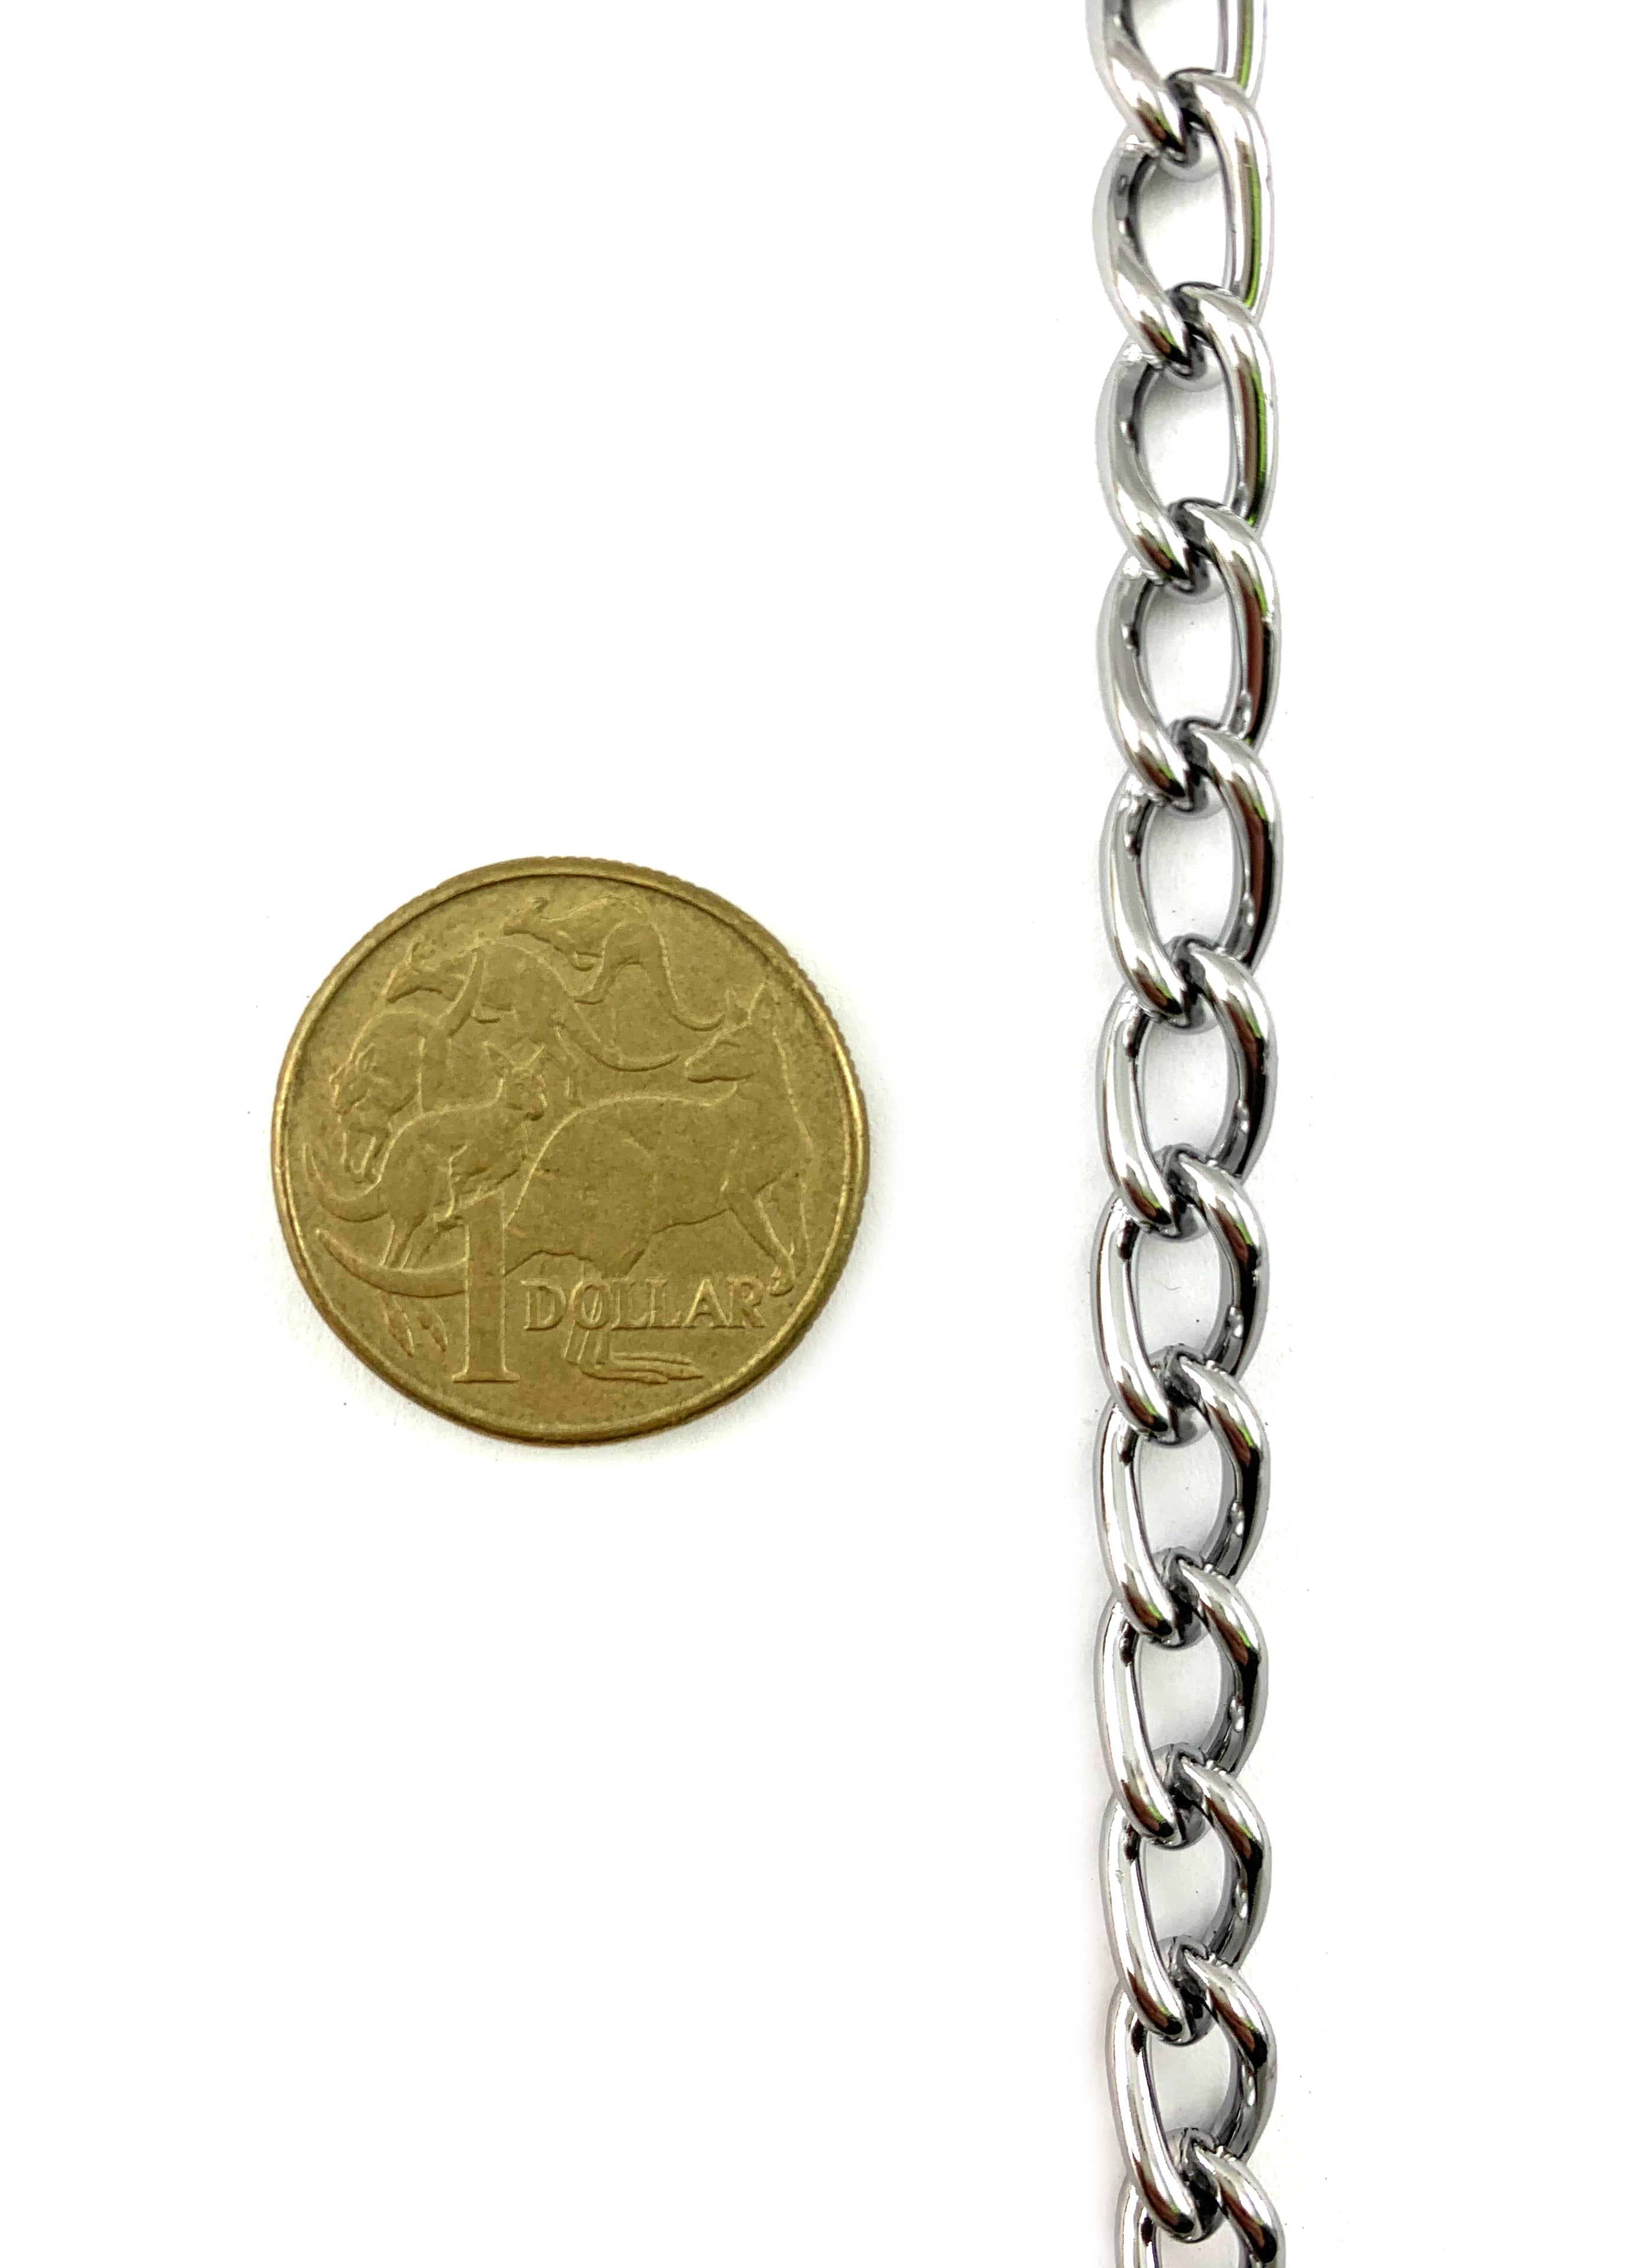 Chrome Curb Chain, 2mm. Chain by the metre. Decorative Chain Australia wide delivery